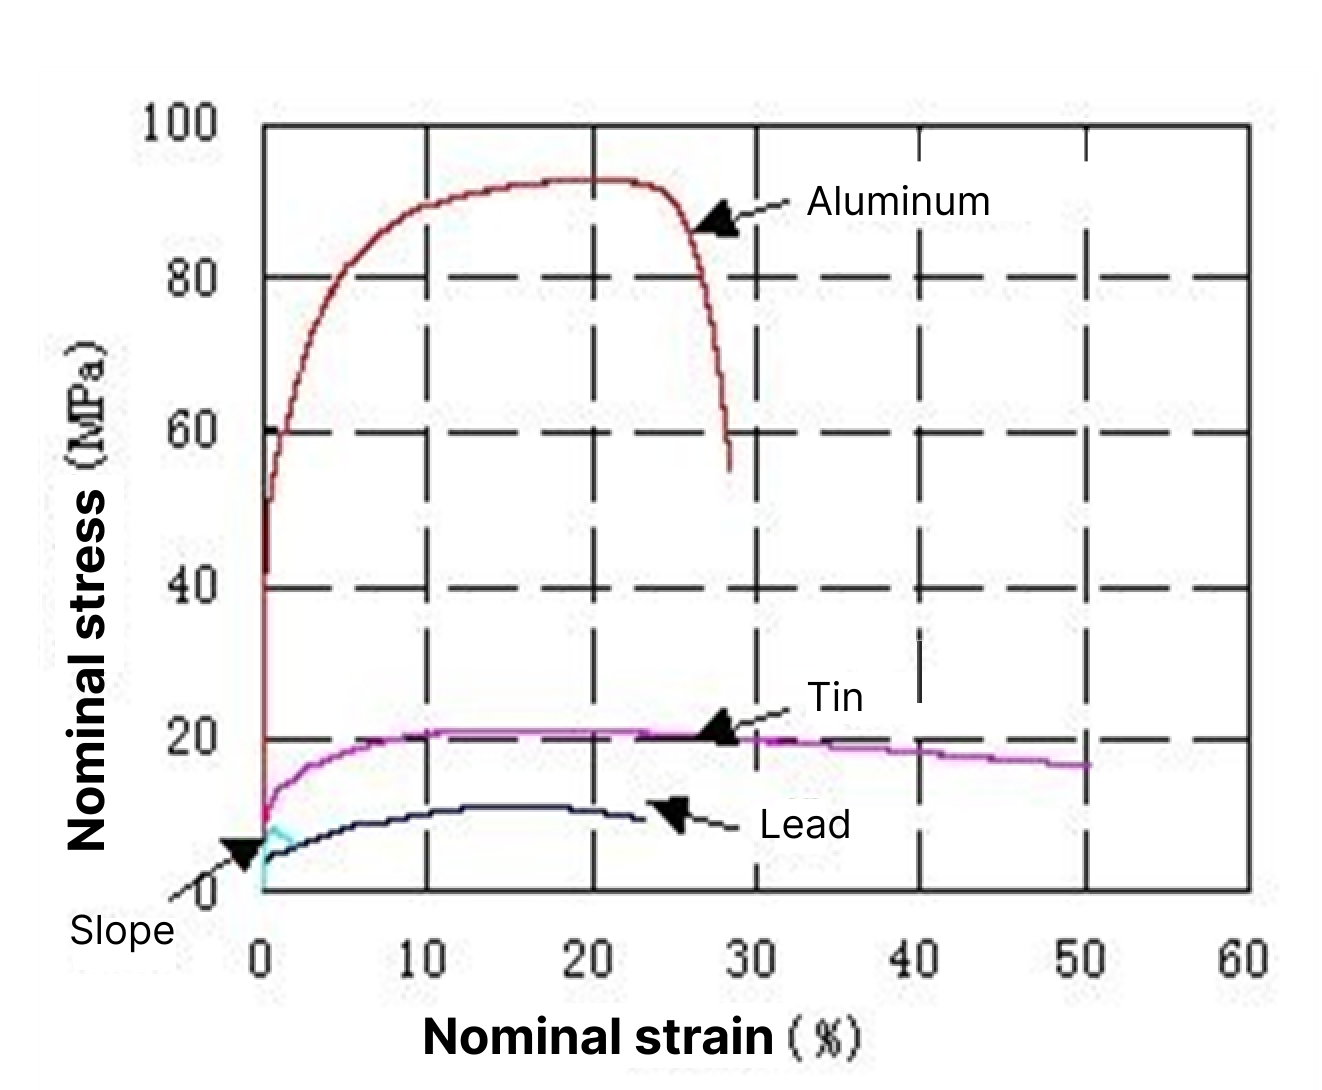 Fig 2.5 Relationship between stress and strain